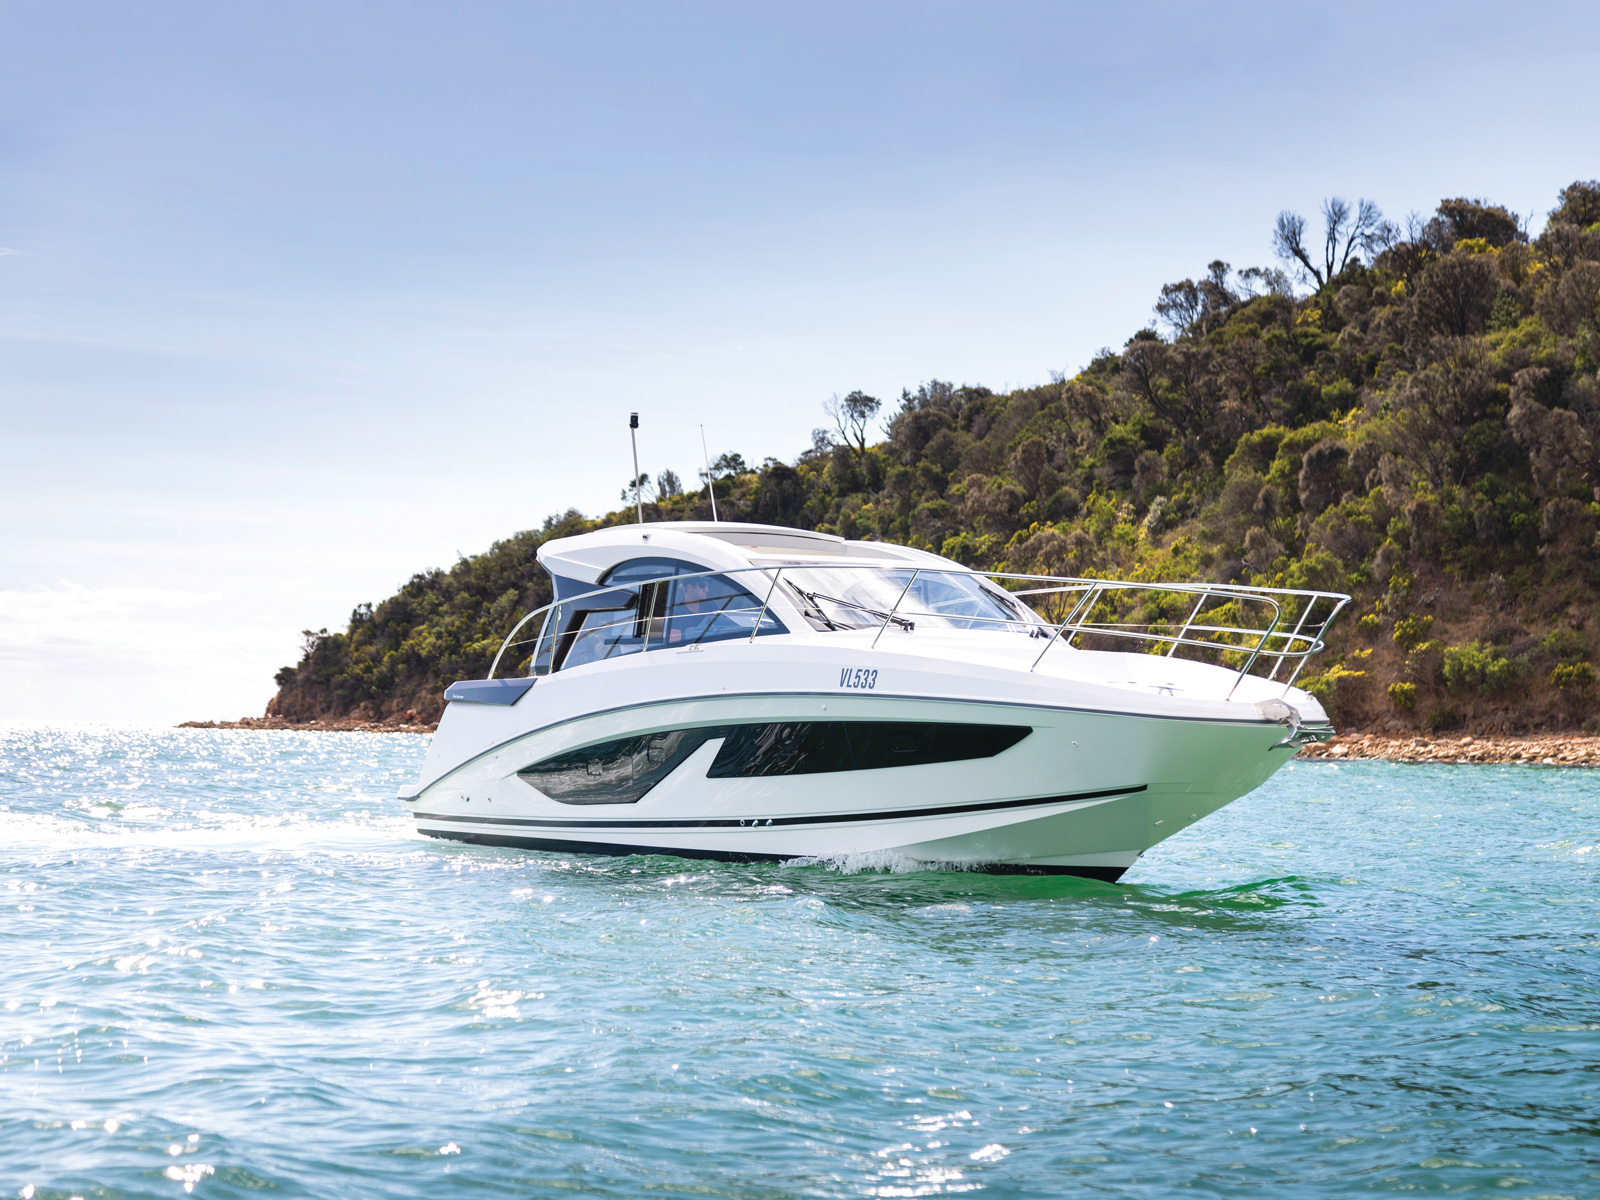 Beneteau boat review by trade a boat